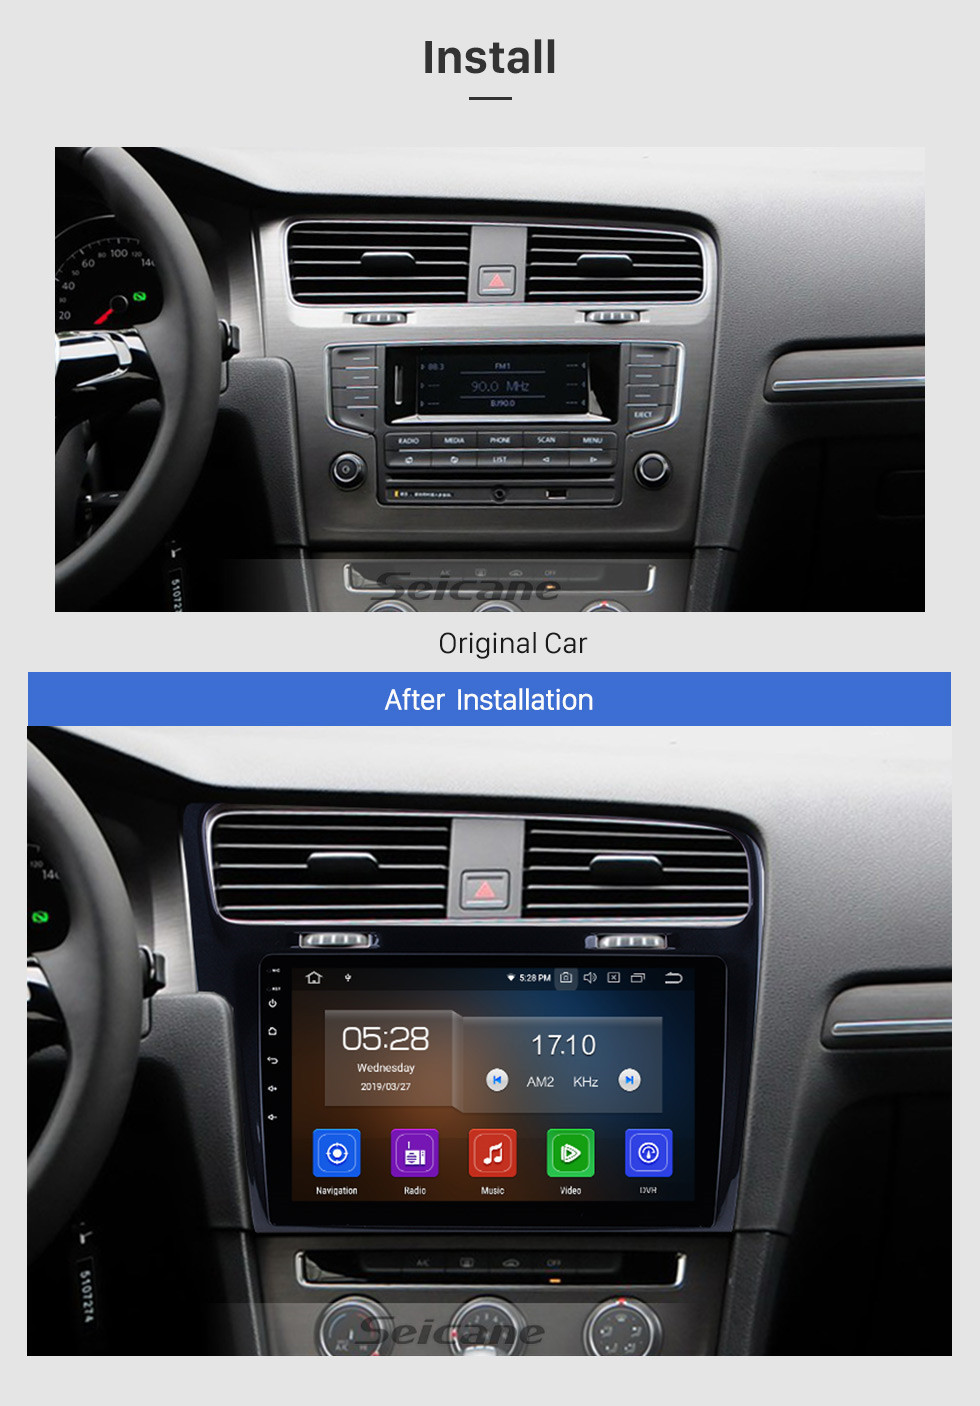 Seicane 10.1 Inch OEM Android 10.0 Radio GPS Navigation system For 2013 2014 2015 VW Volkswagen GOLF 7 LHD Bluetooth HD Touch Screen WiFi Music SWC TPMS DVR OBD II Rear camera AUX 1080P Video USB Carplay